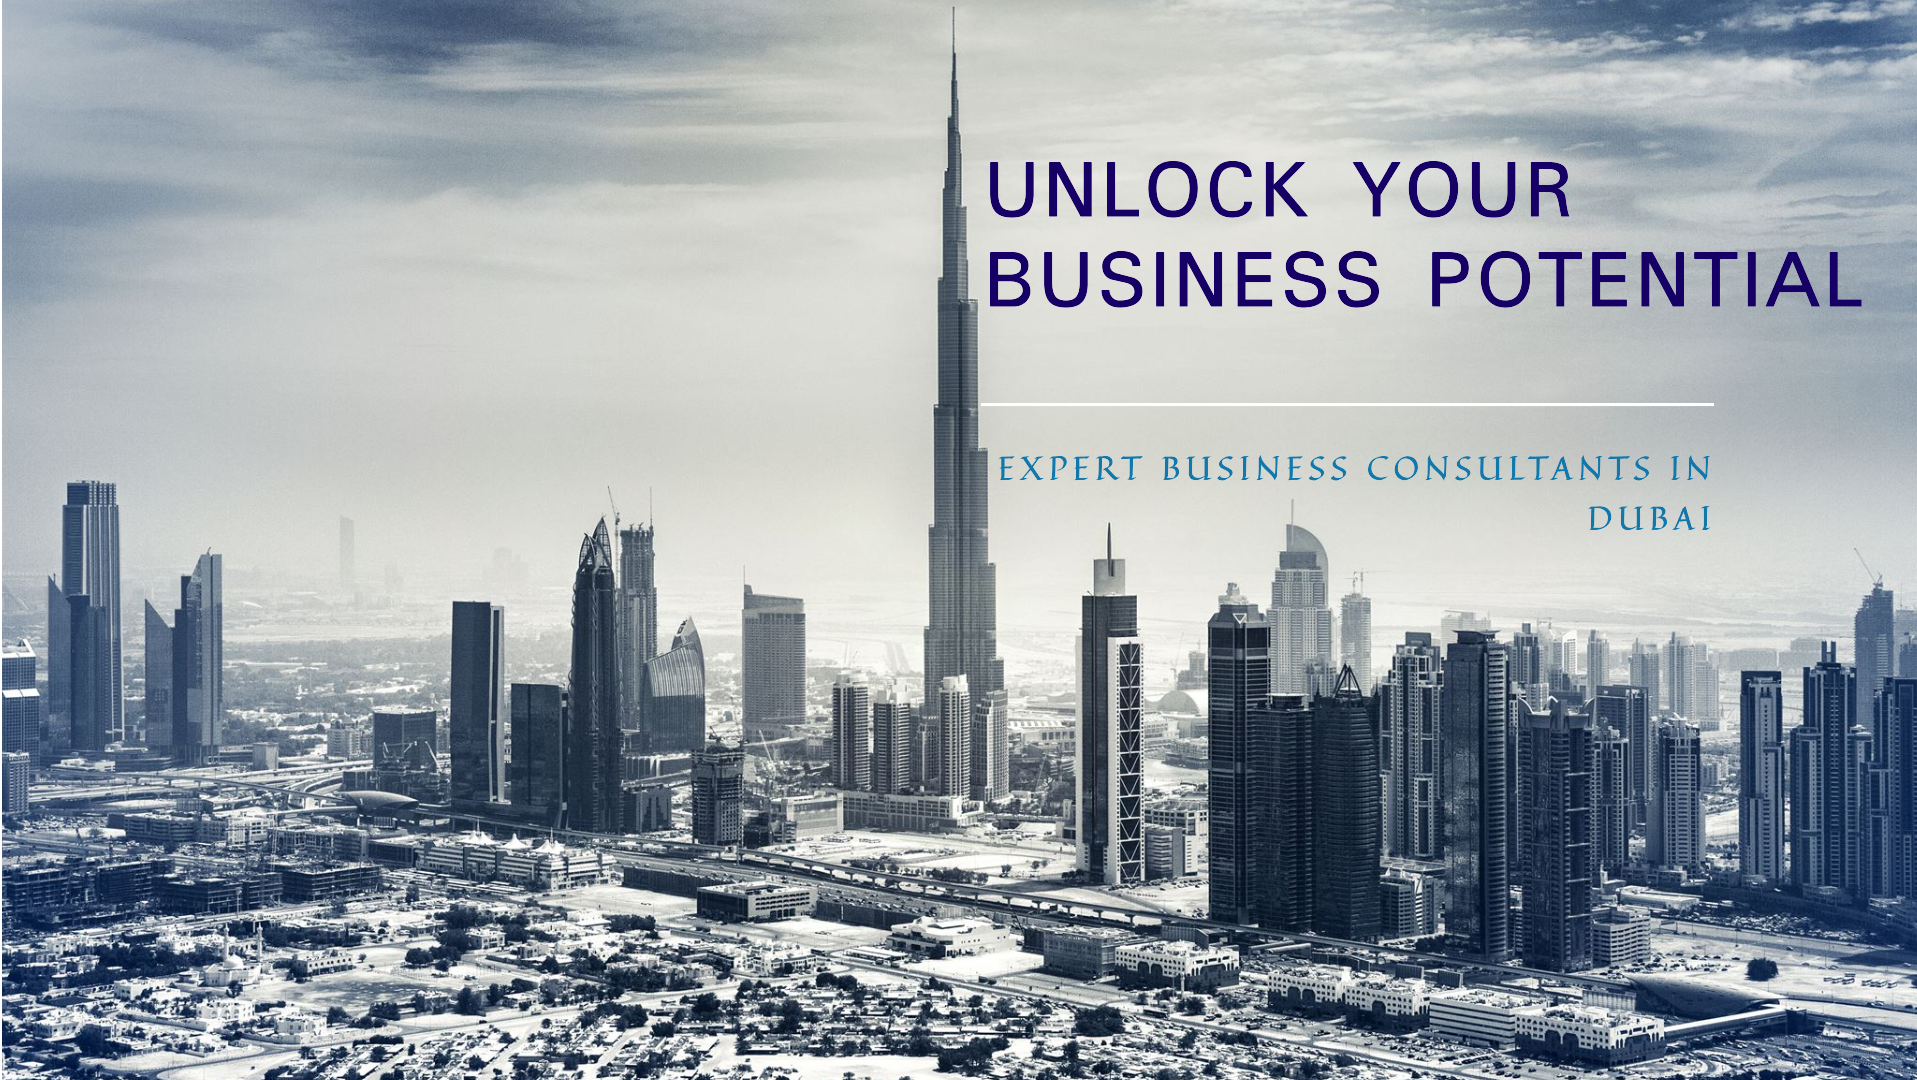 Expert Business Consultants in Dubai Open Growth Opportunities